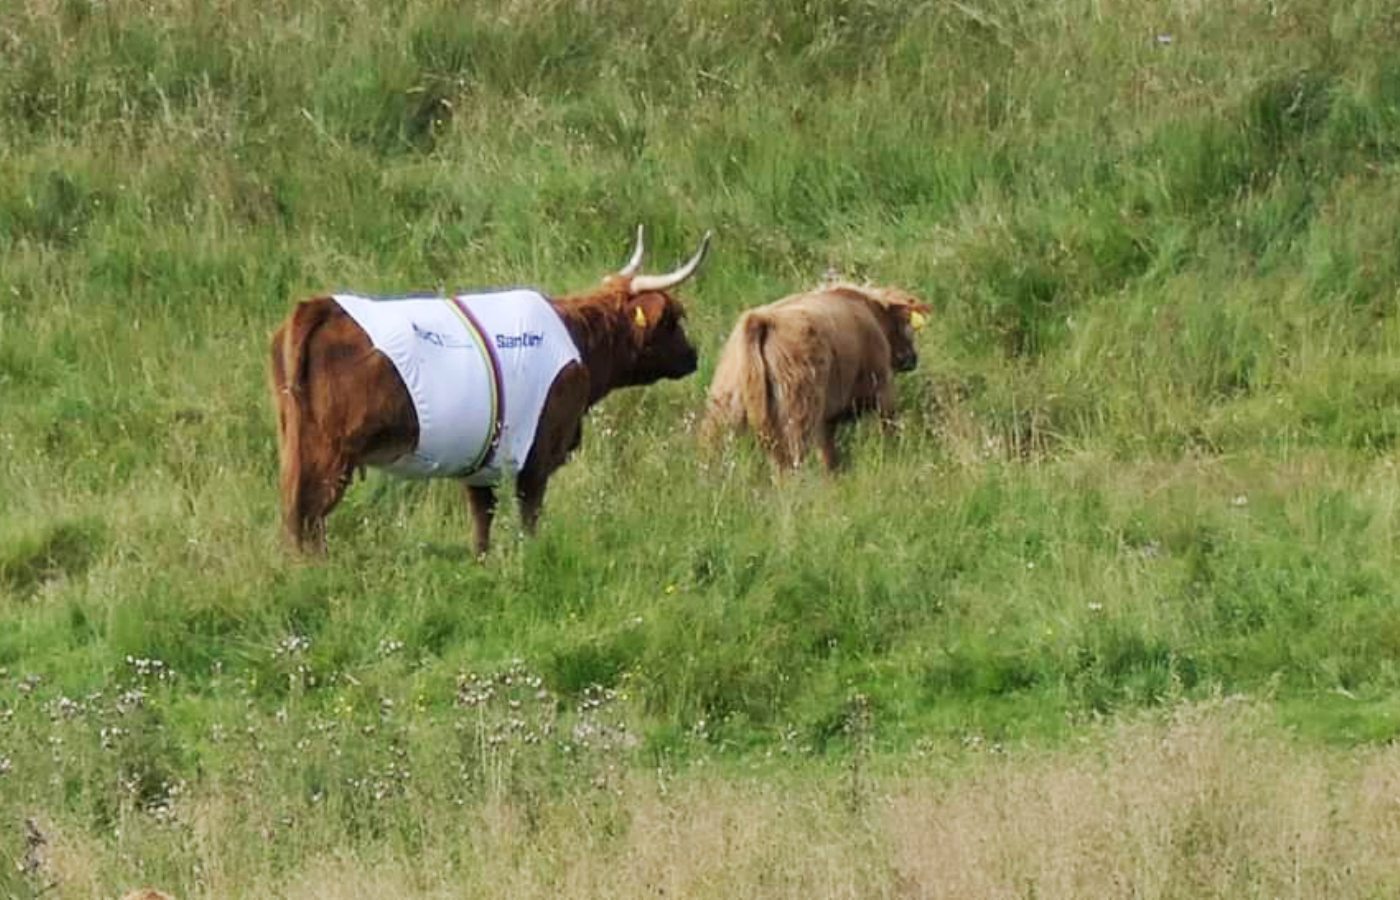 A Highland cow wearing a cycling jersey for the UCI.